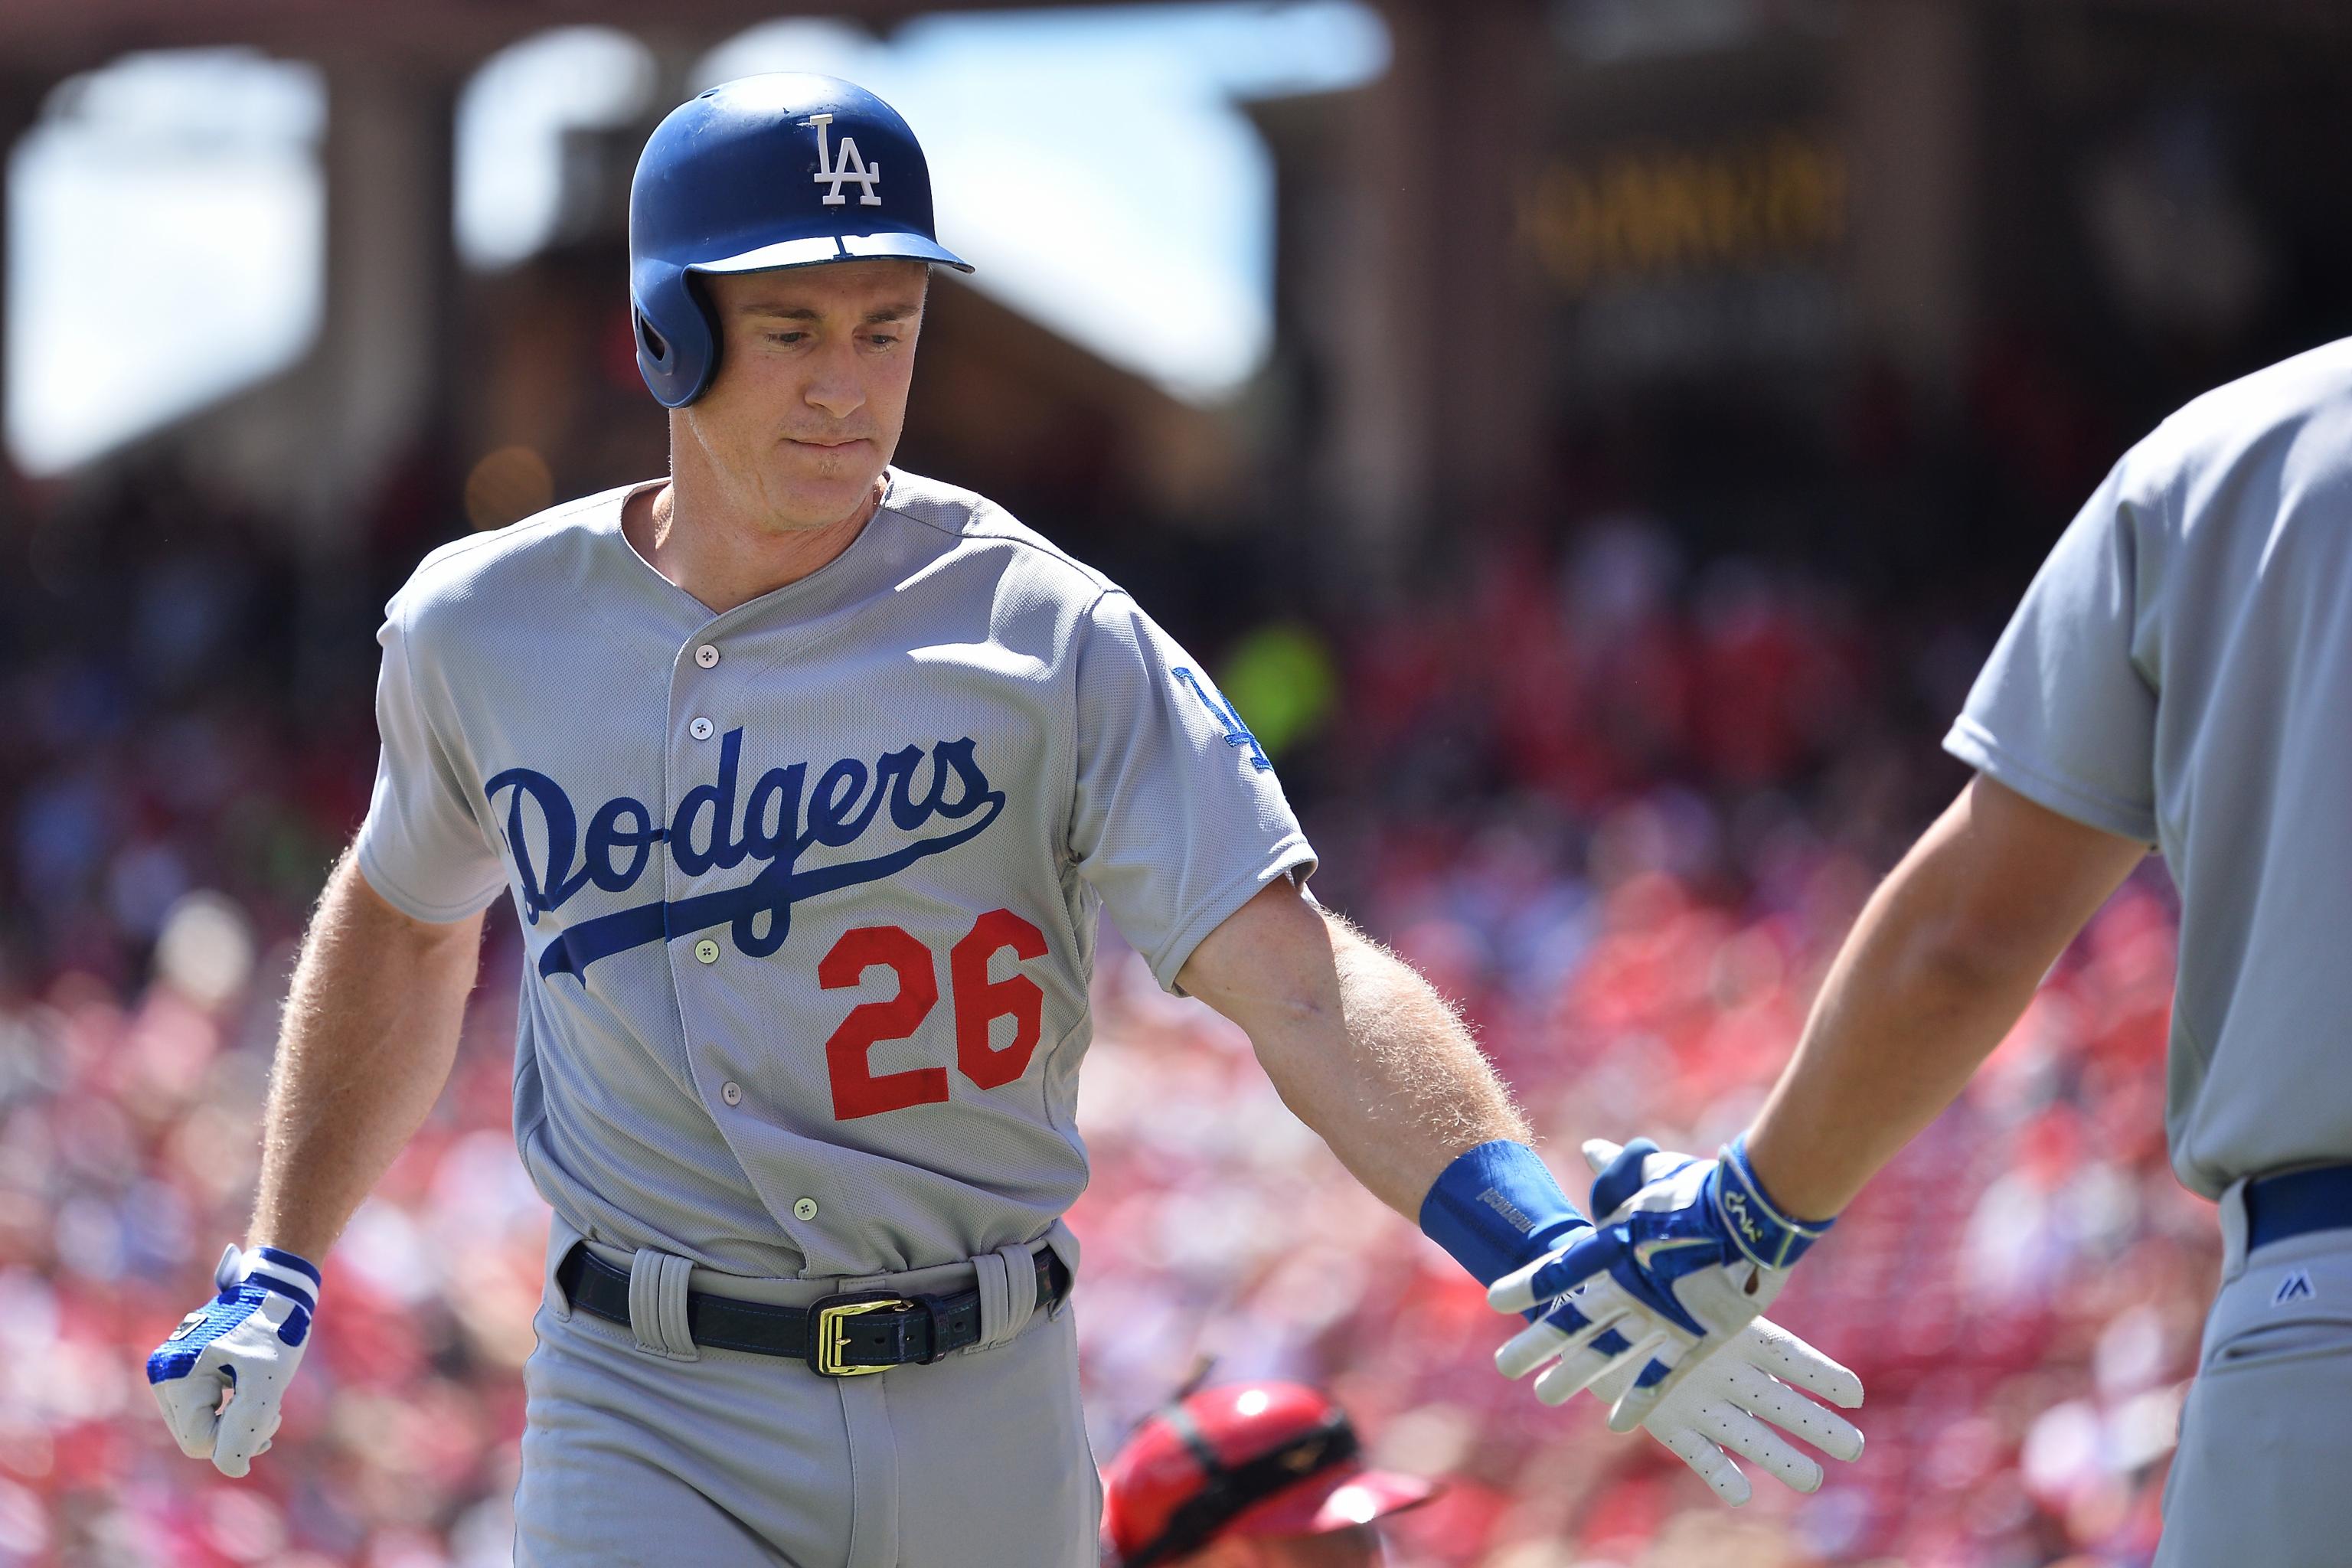 Phillies have agreed to trade Utley to Dodgers